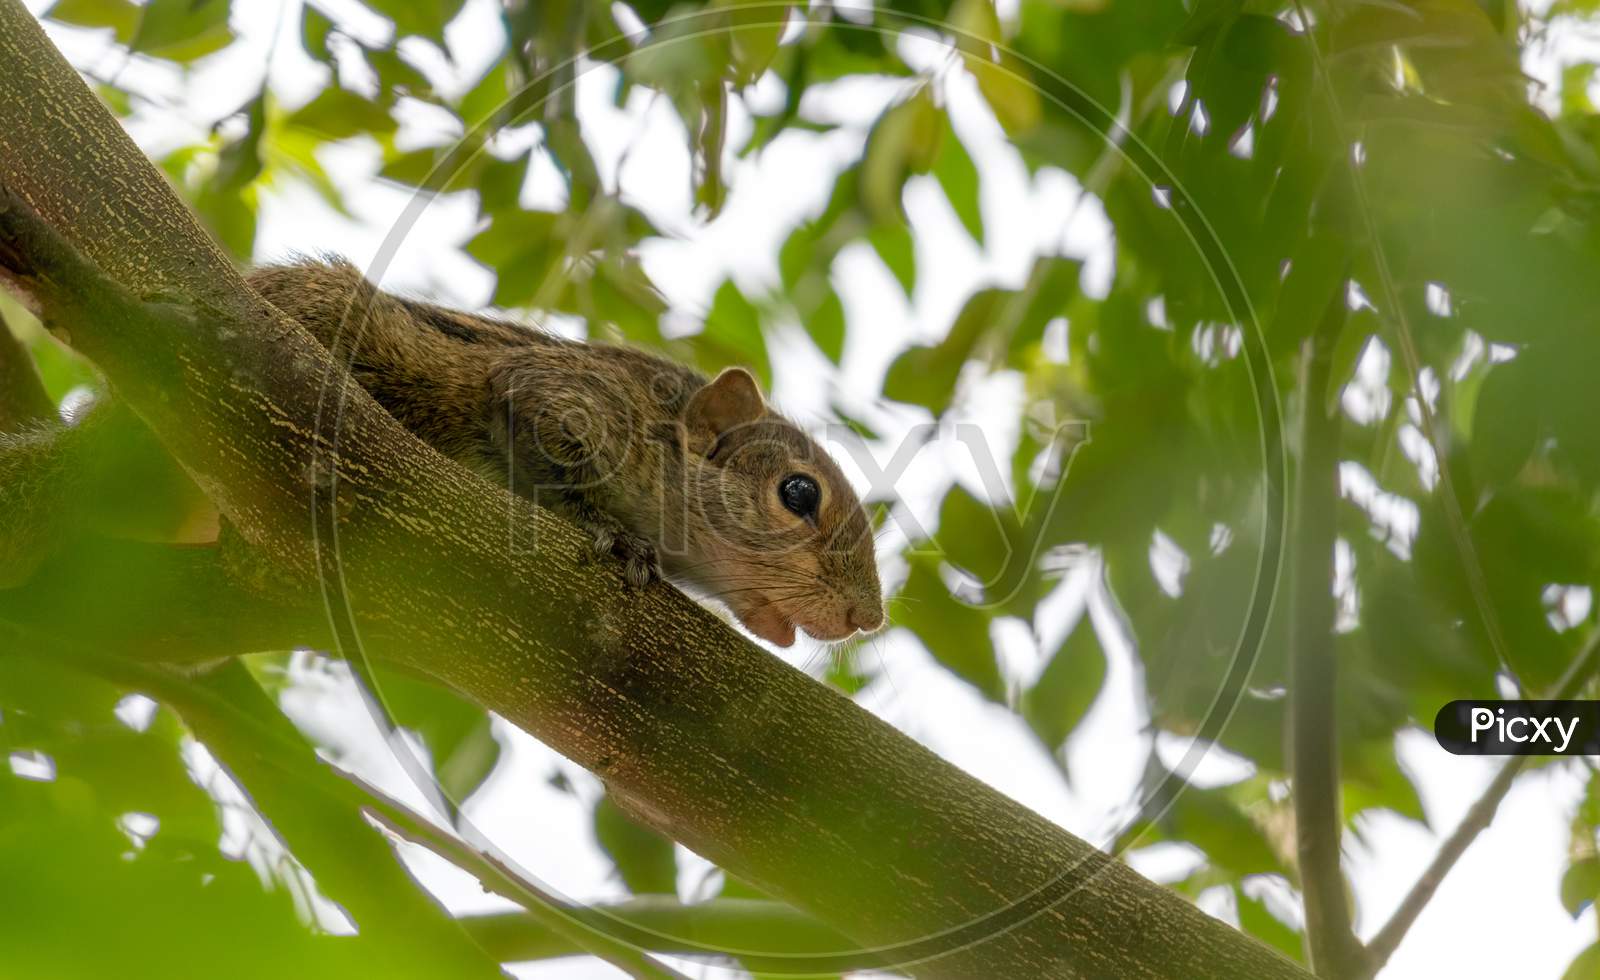 Squirrel On A Tree Branch In The Shade Looking Down